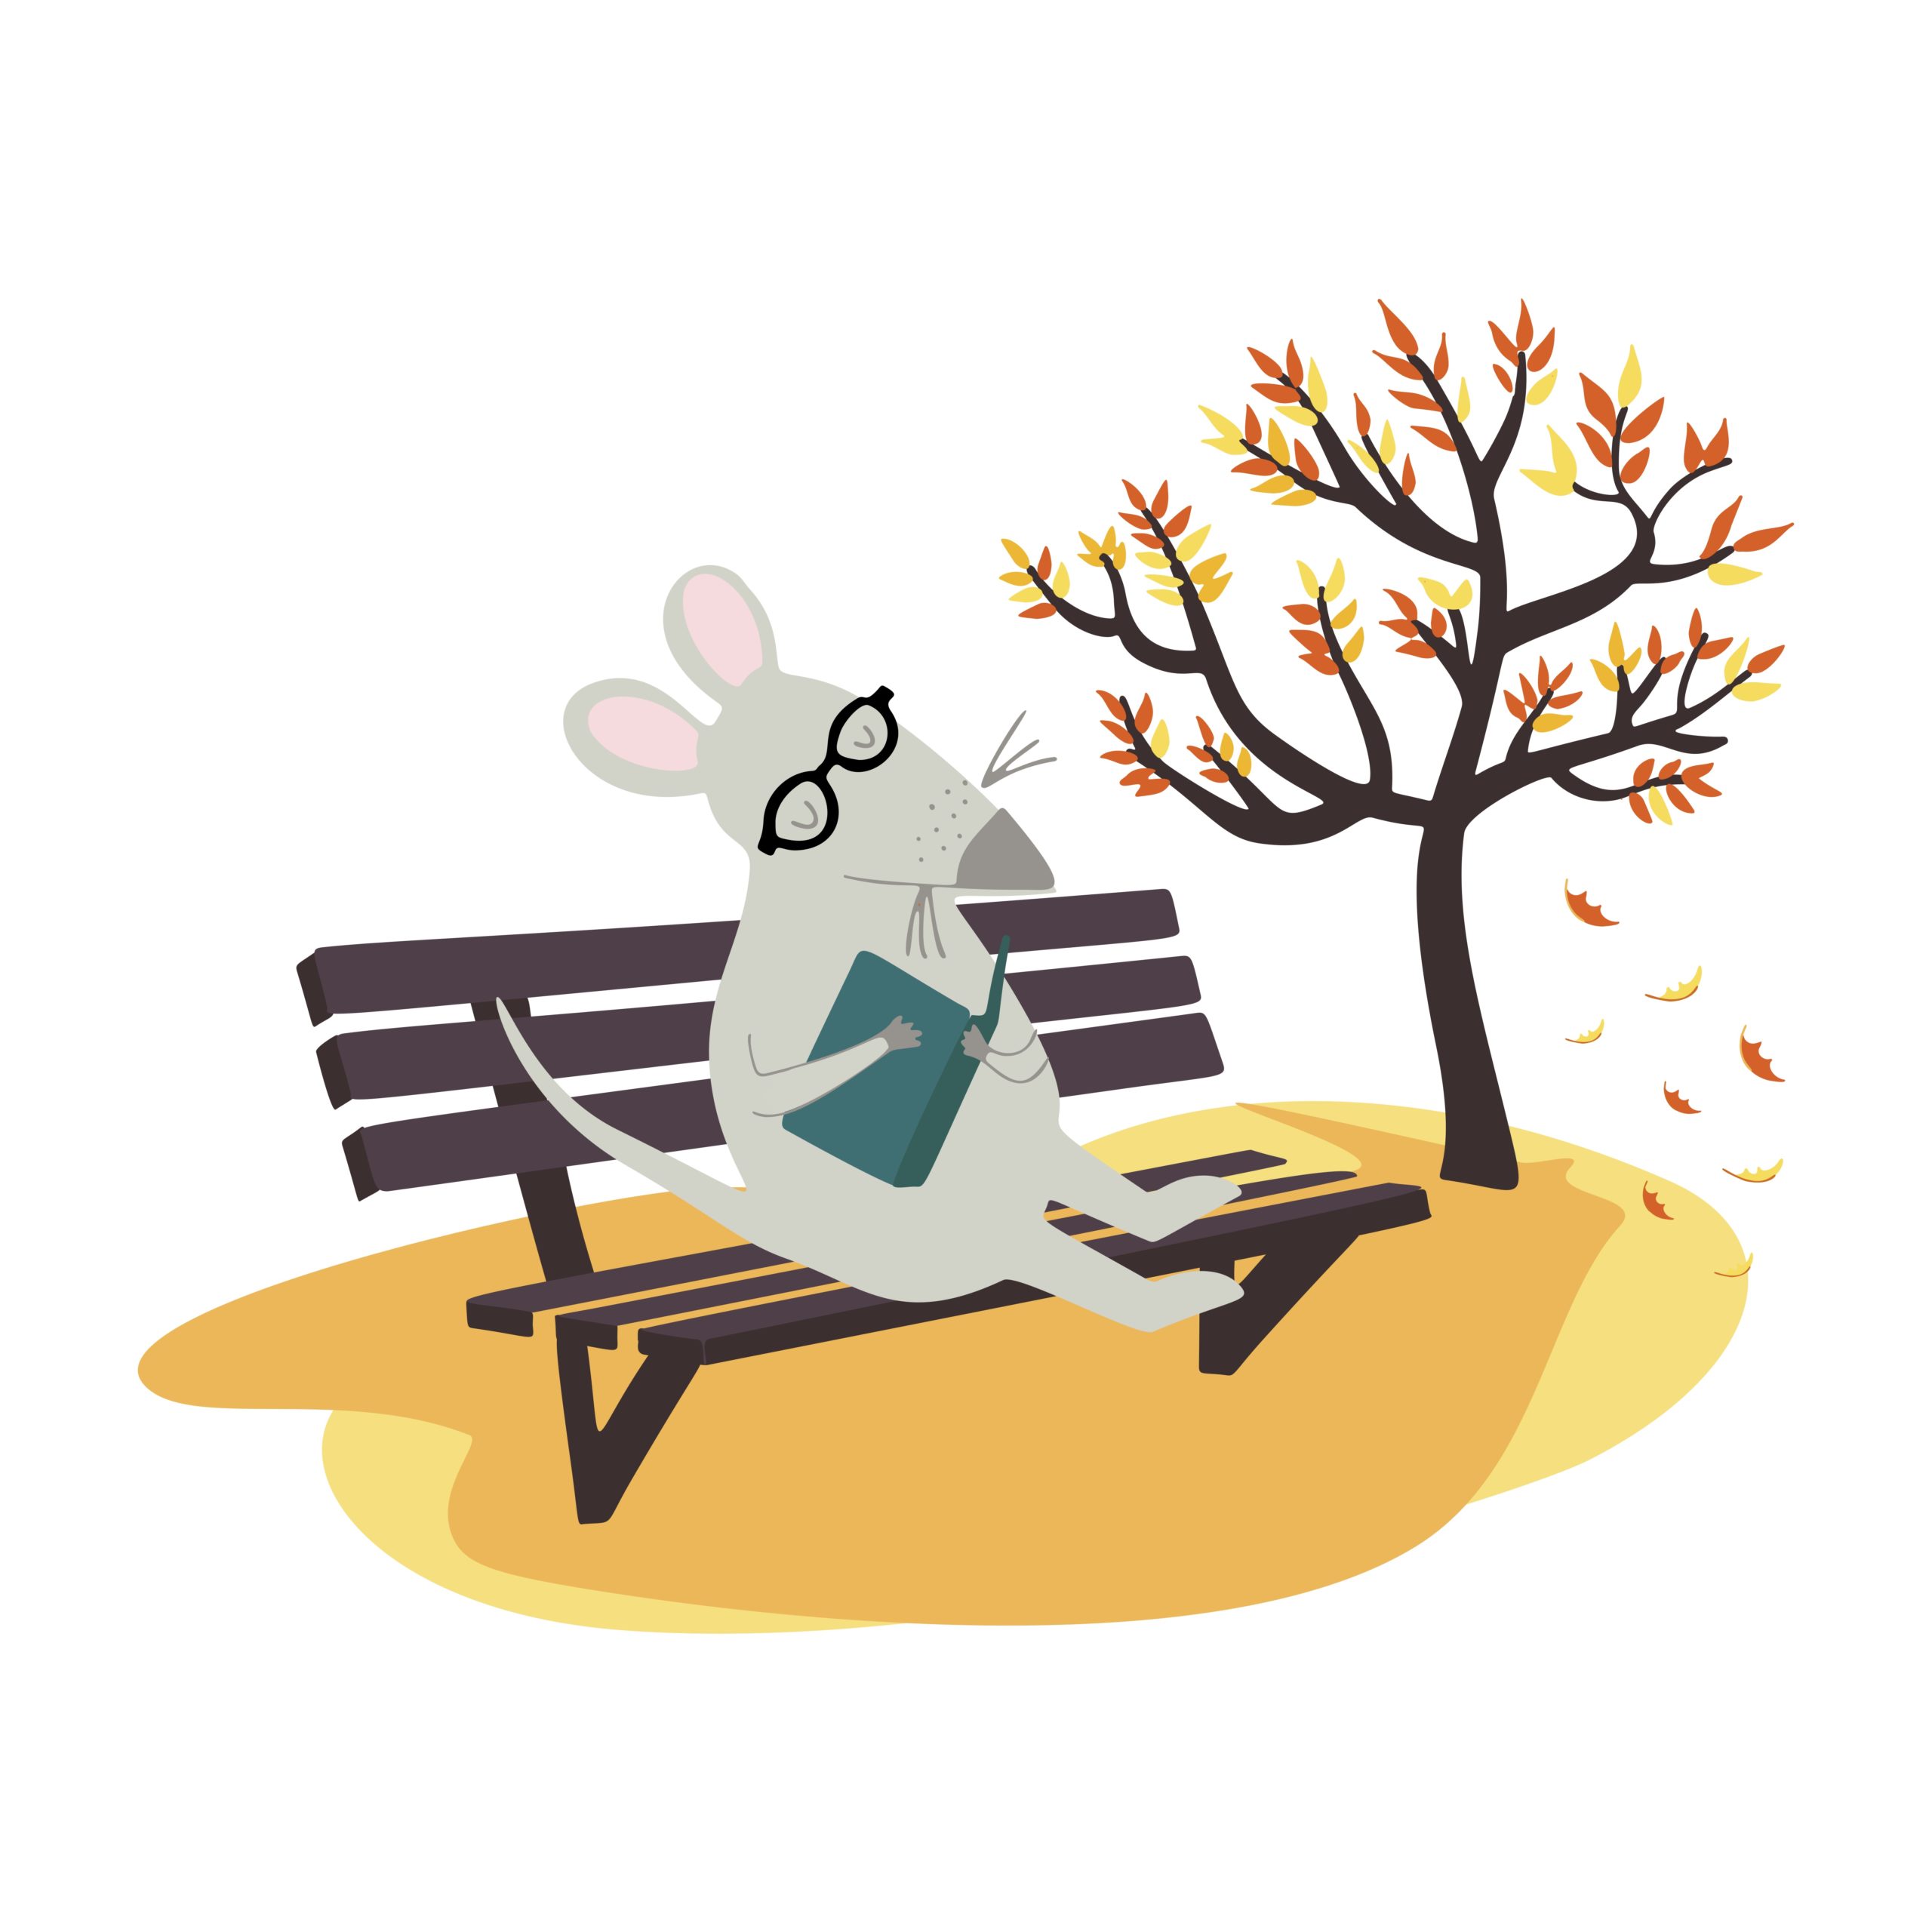 Mouse reading a book under a tree